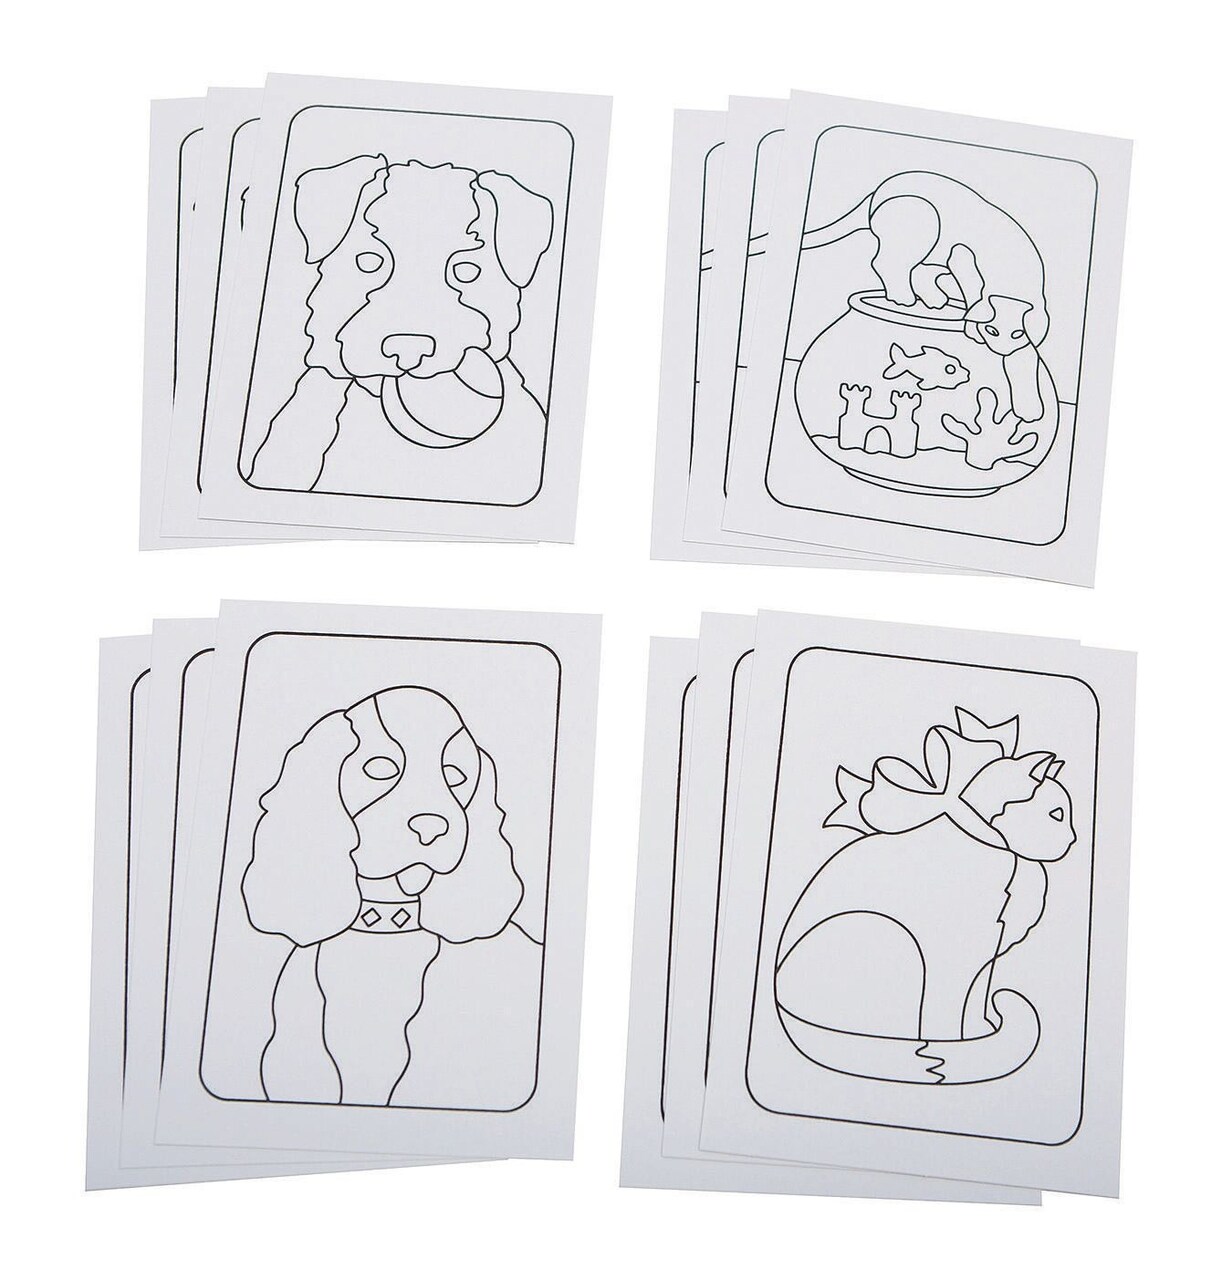 S&S Worldwide Adhesive Sand Art Boards for Creating Sand Pictures, Great  for Kids and Adults, 3 Each of 4 Dog & Cat Designs, 5 x 7 Pack of 12